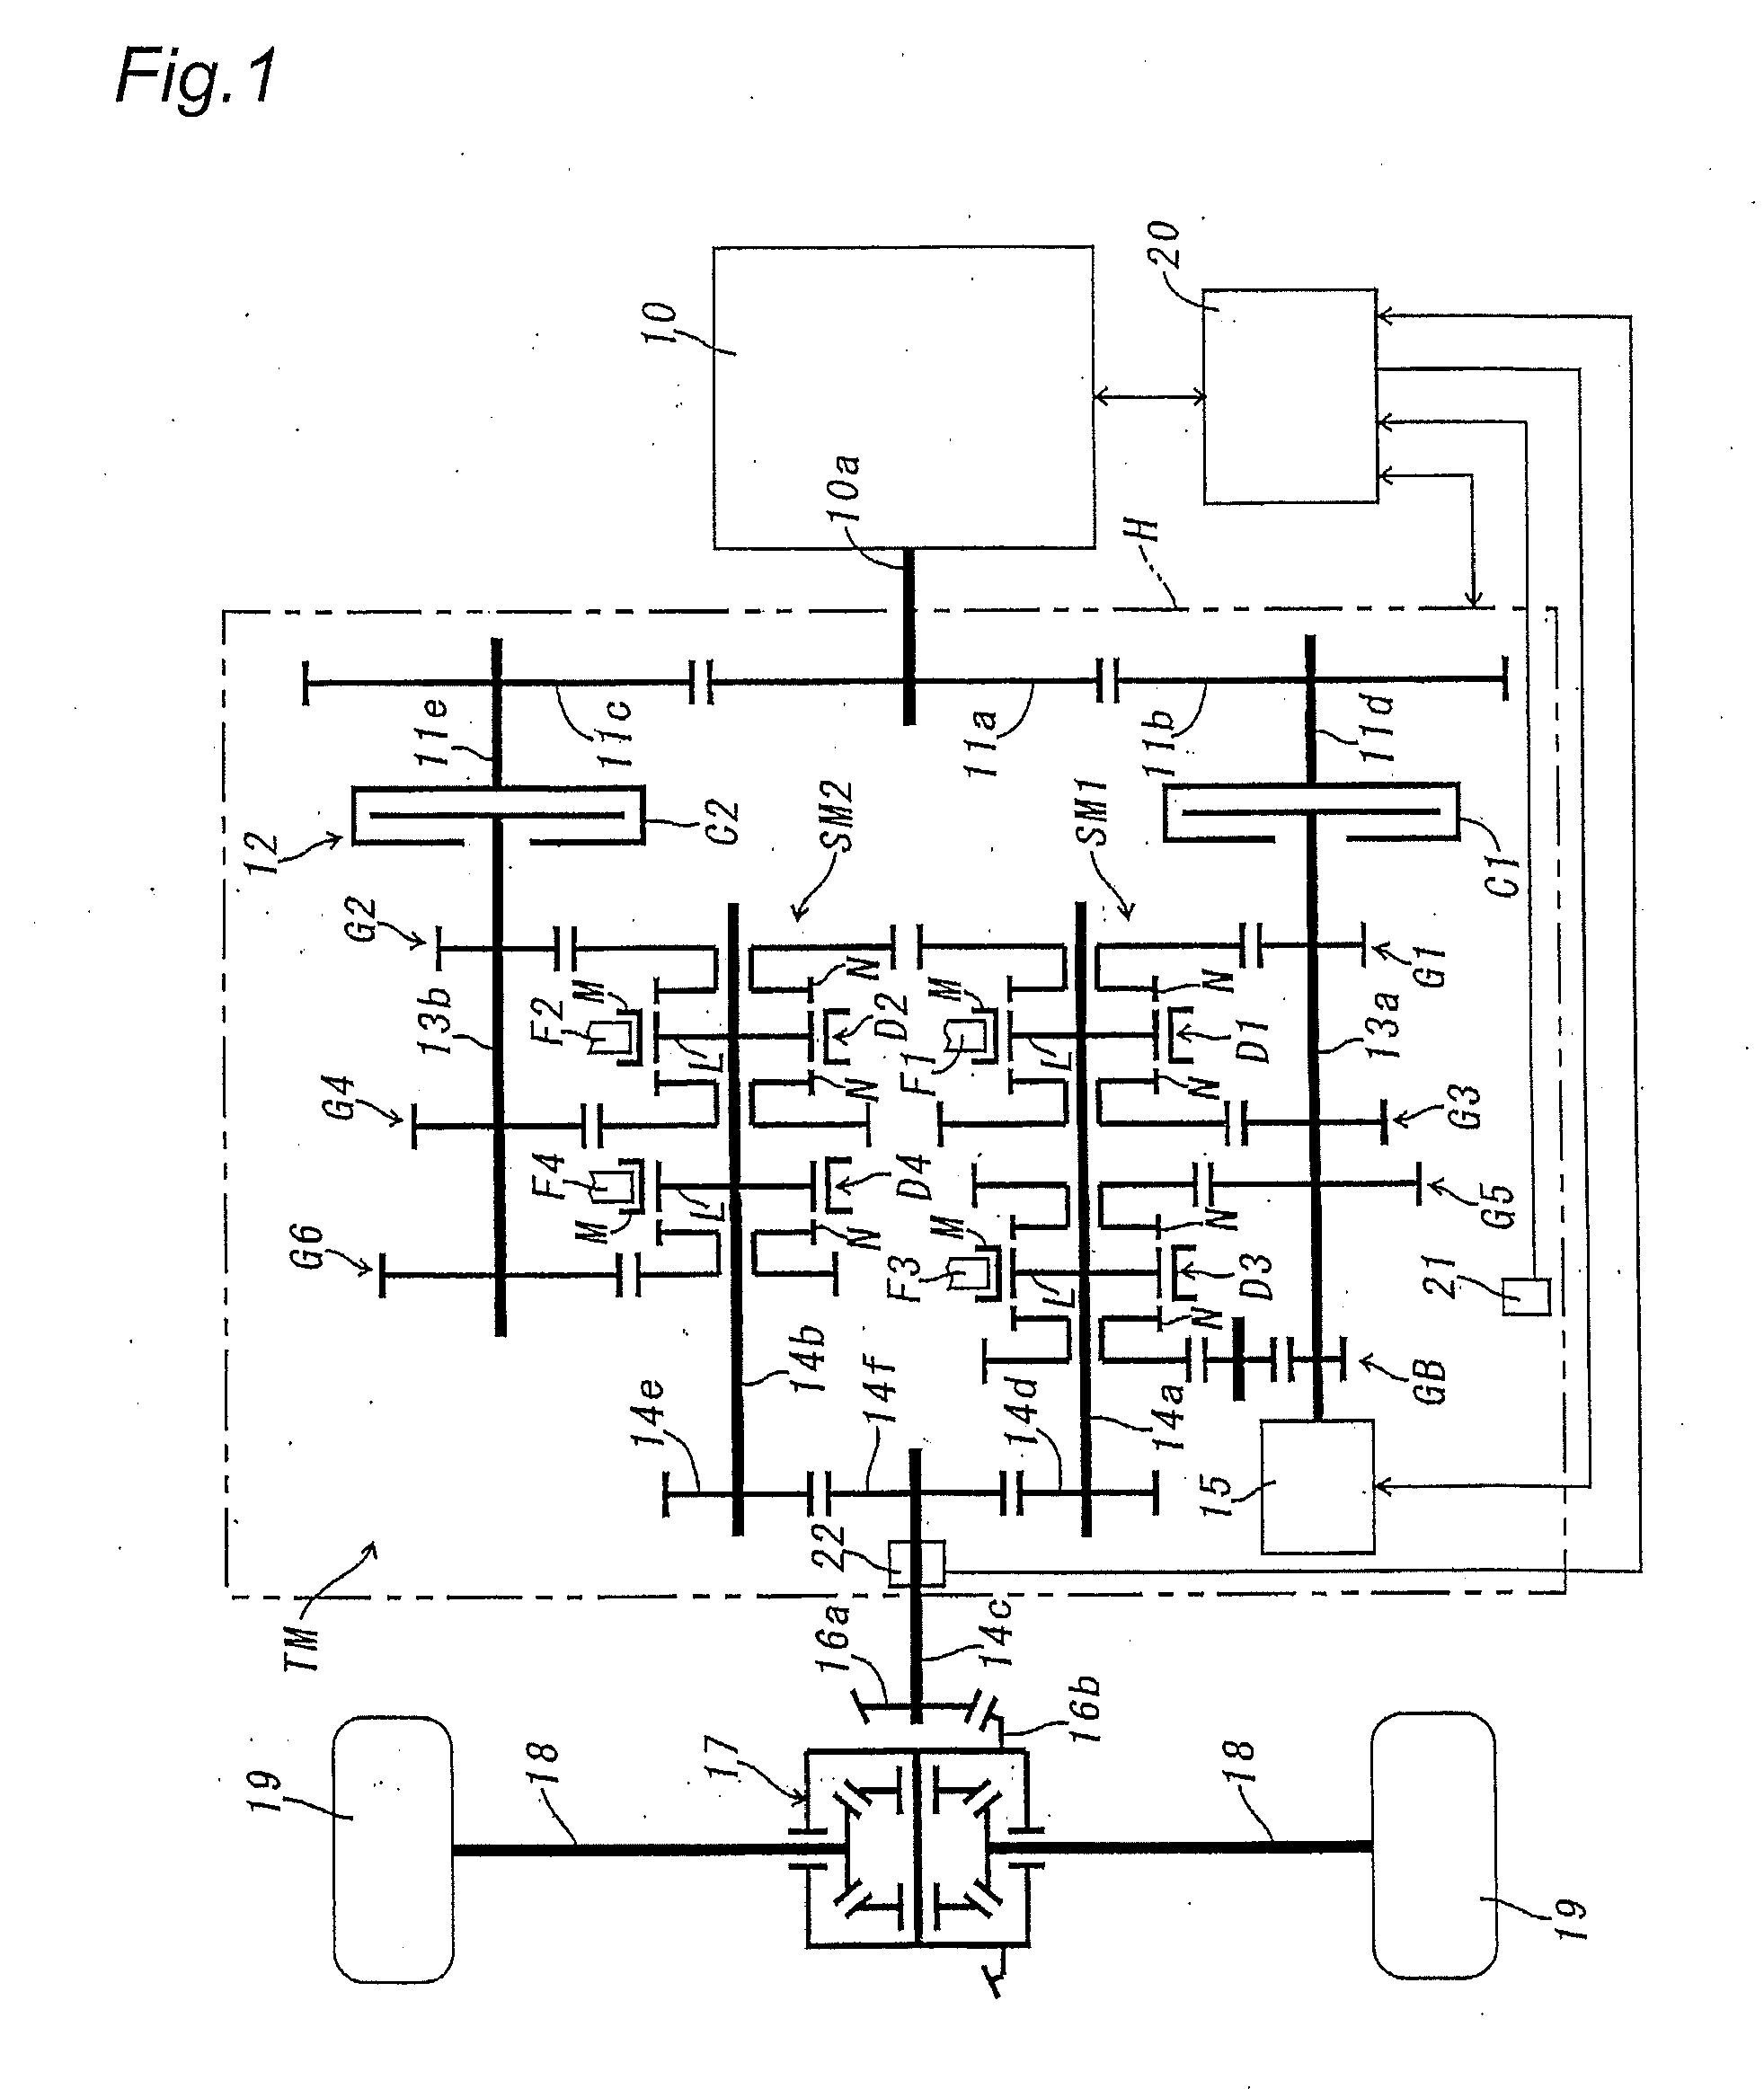 Control system of hybrid power drive apparatus